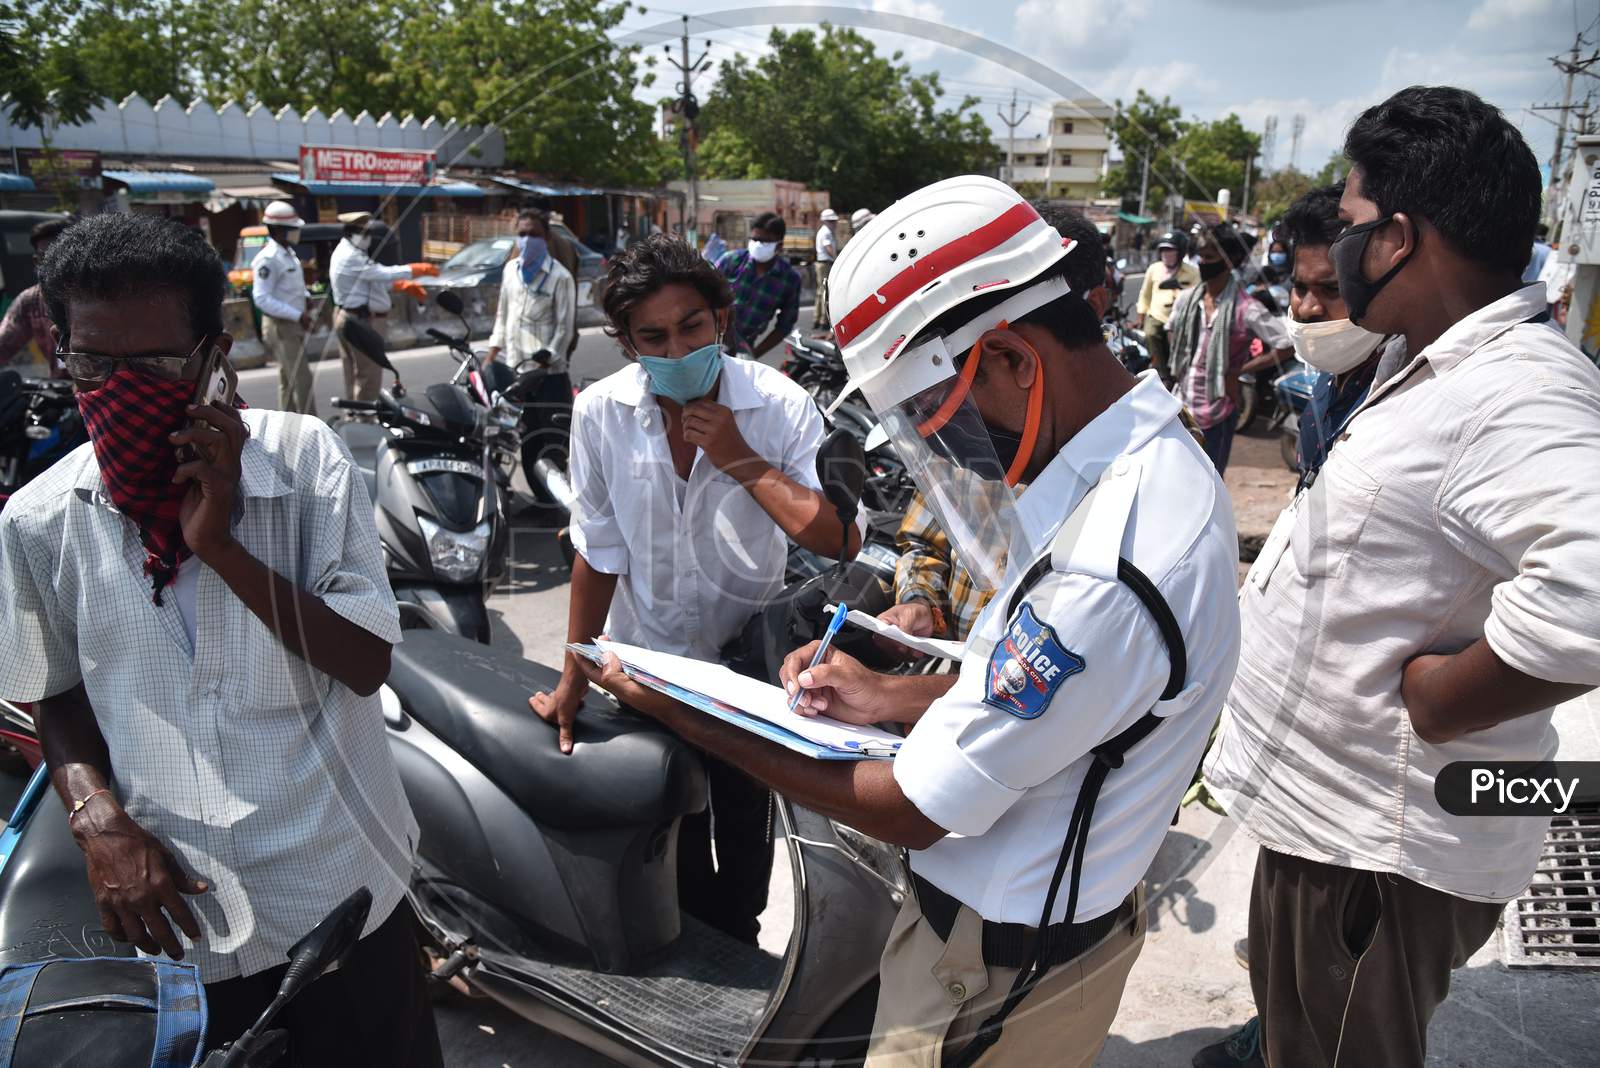 Traffic Police Personnel Stops The Commuters And Seeks An Explanation For Violating The Lockdown Norms During The Nationwide Lockdown Amid Coronavirus Pandemic In Vijayawada.